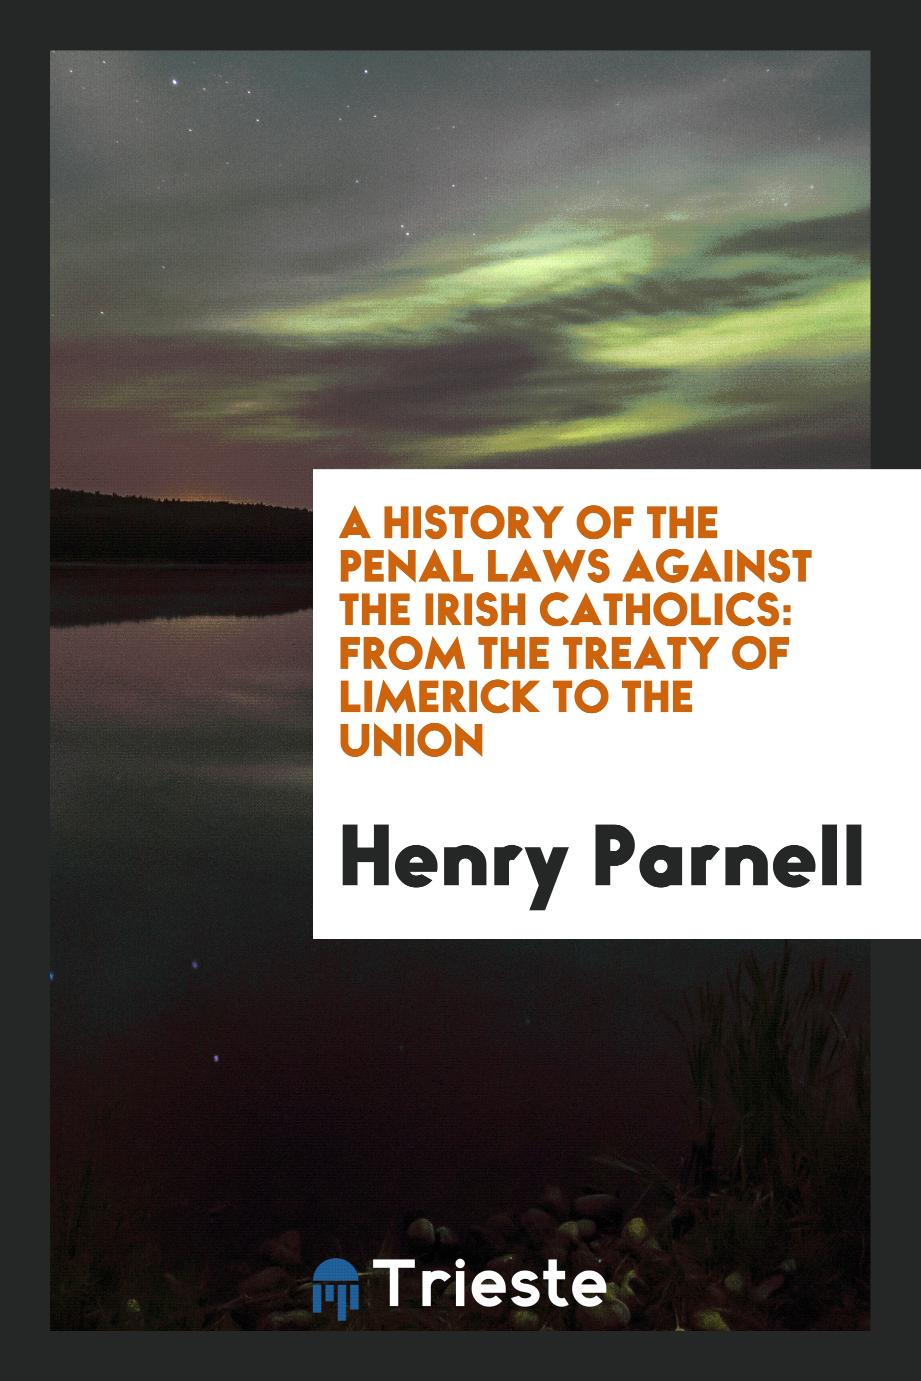 A History of the Penal Laws Against the Irish Catholics: From the Treaty of Limerick to the Union